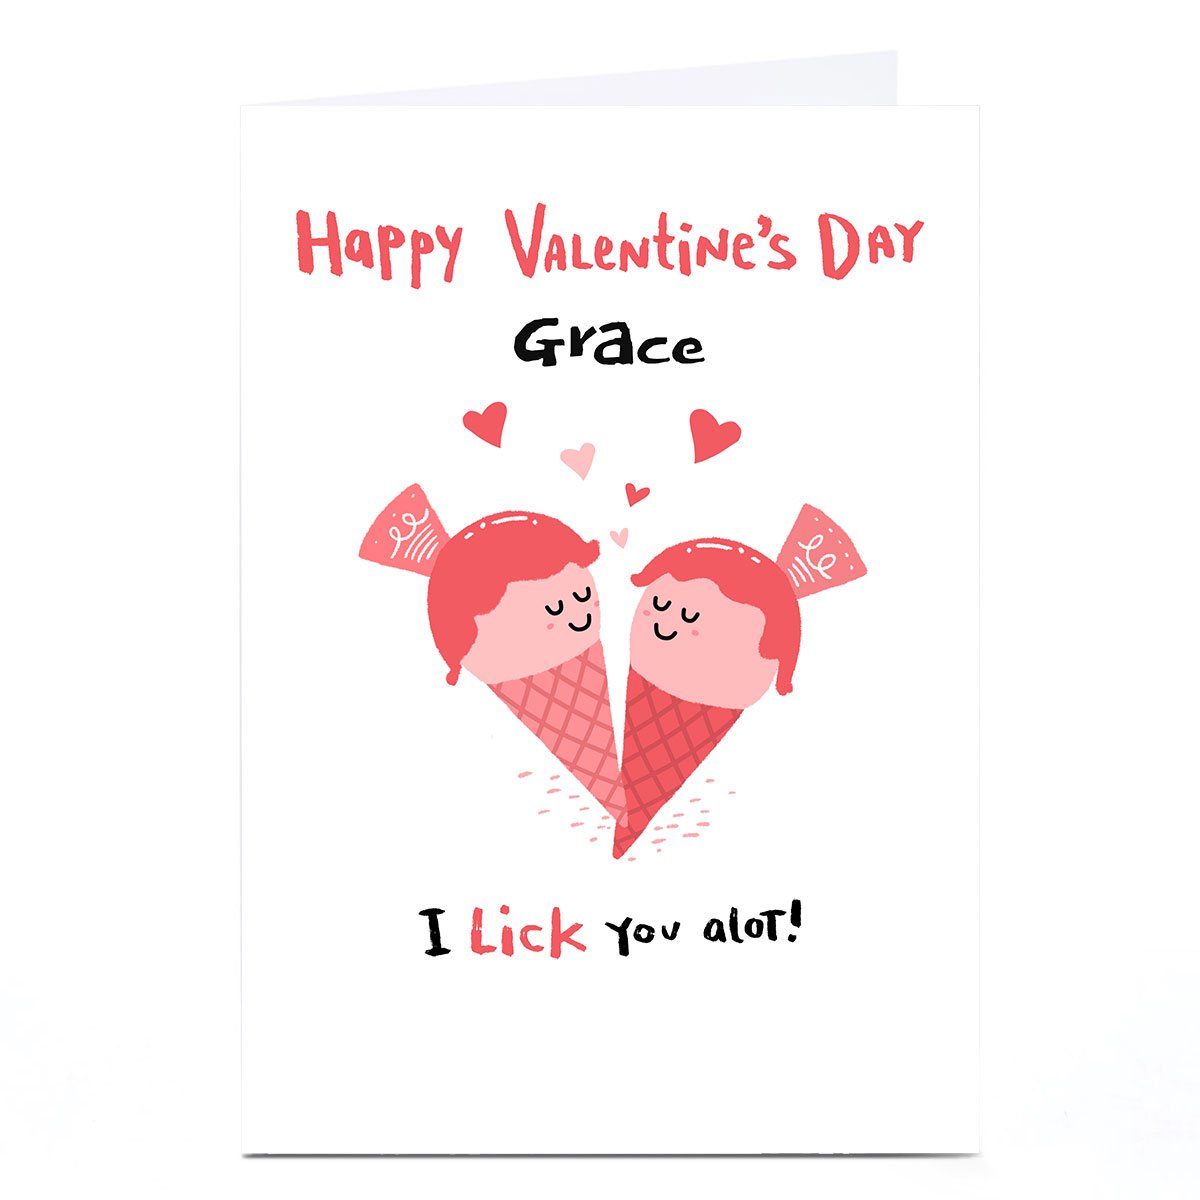 Buy Personalised Hew Ma Valentine's Day Card - Lick You A Lot for GBP 1 ...